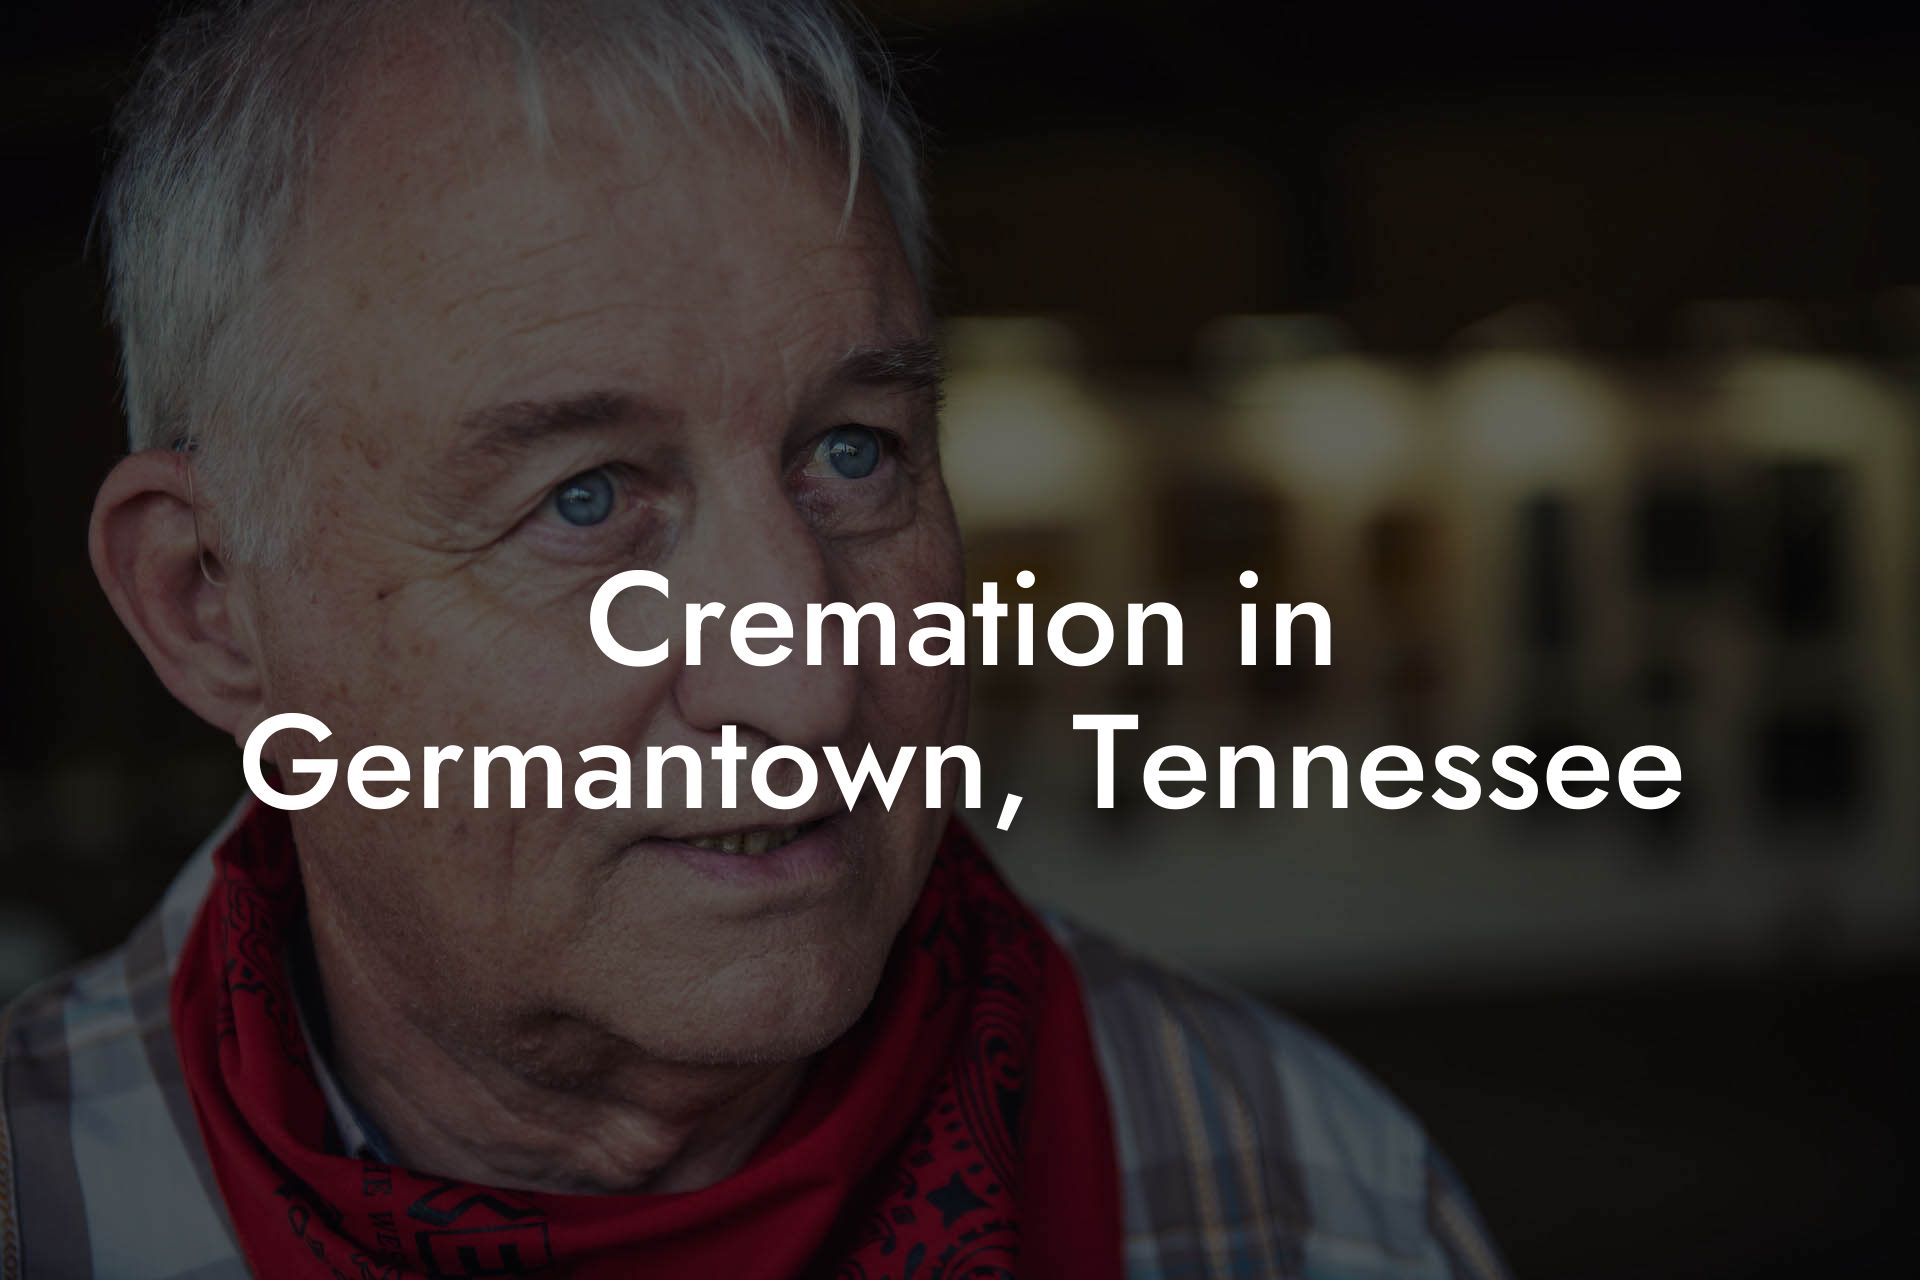 Cremation in Germantown, Tennessee